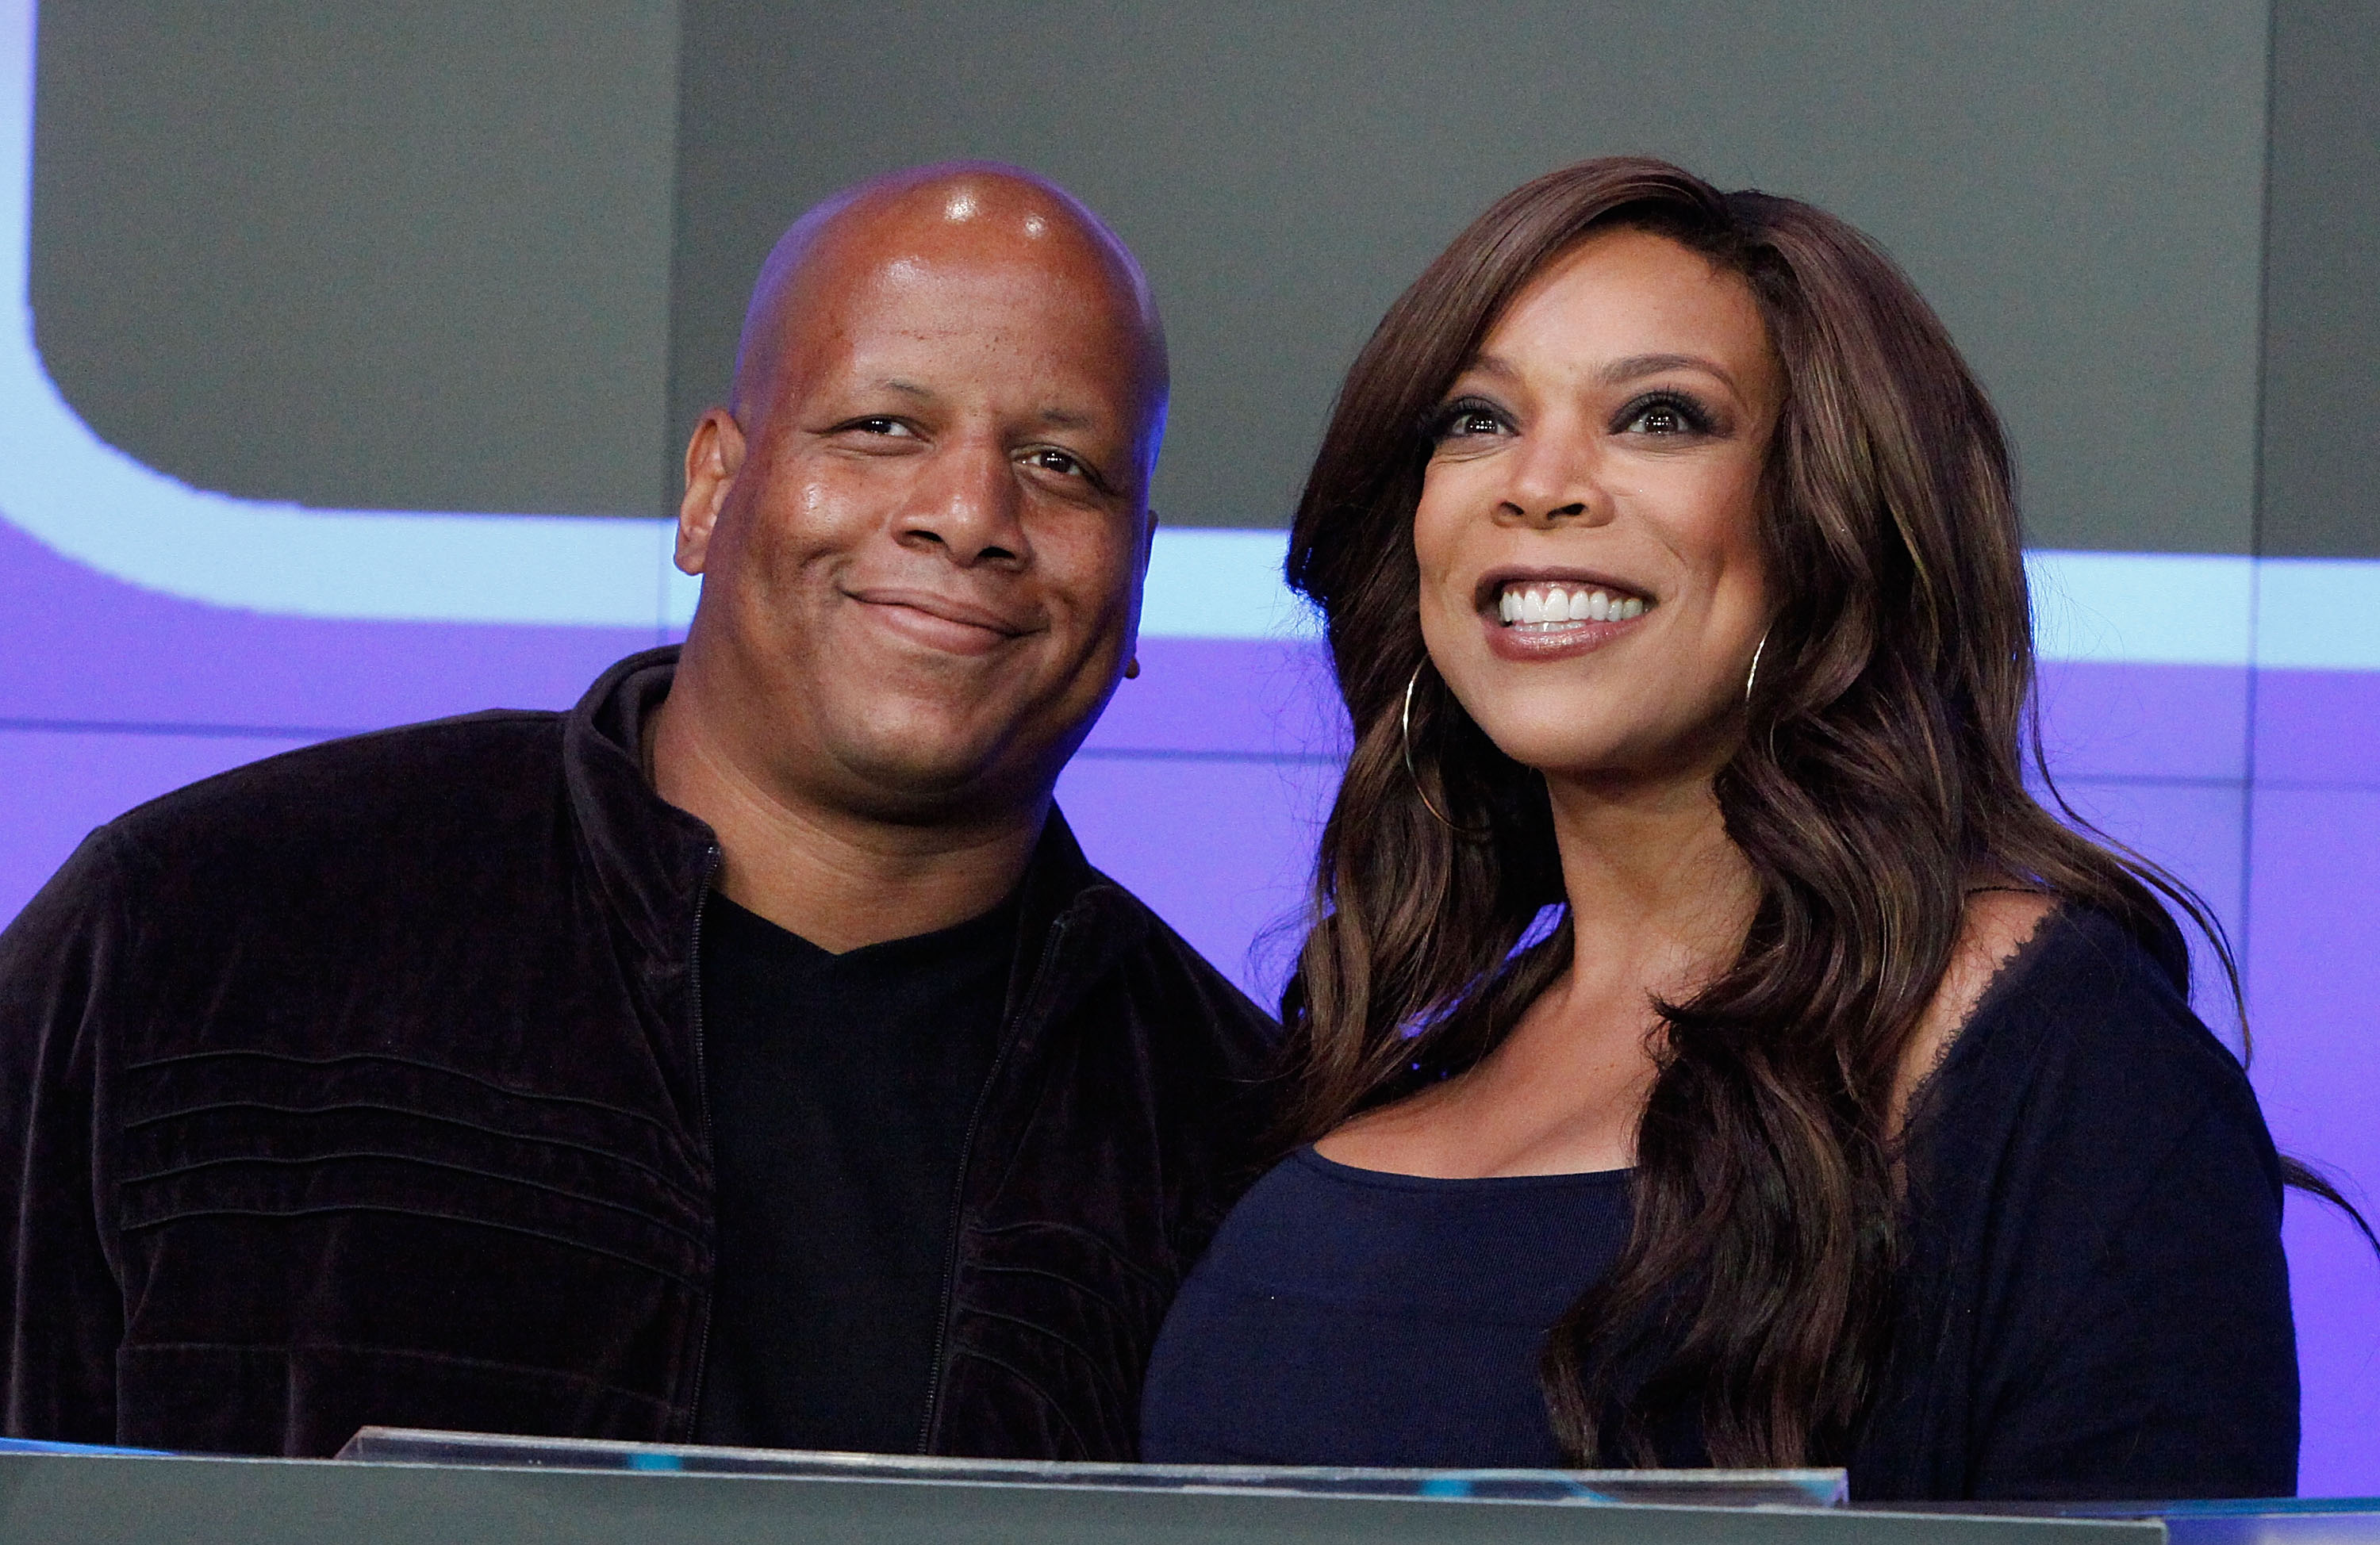 Kevin Hunter and Wendy Williams at the NASDAQ MarketSite on August 25, 2010. | Photo: Getty Images